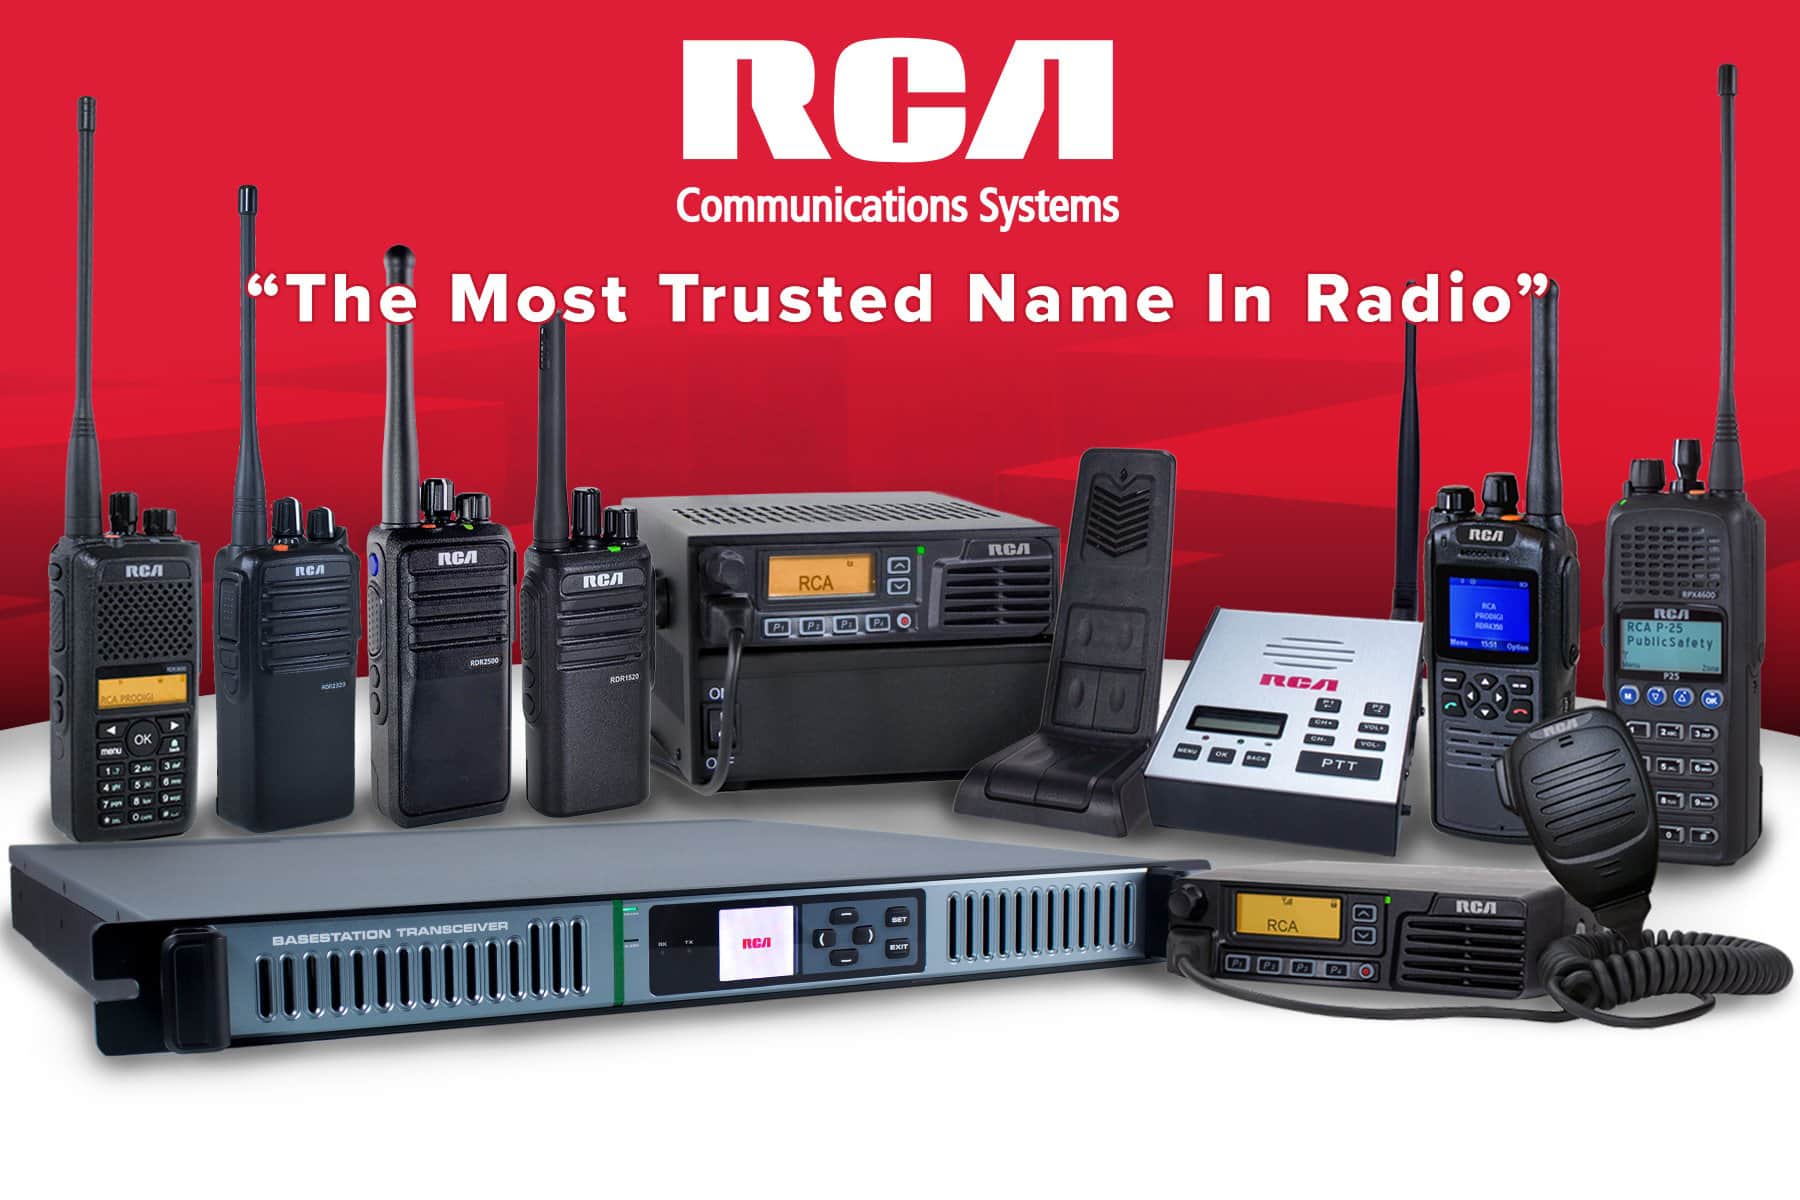 An RCA two-way radio lineup includes six portable models, one base station, one compact base station, one repeater, one mobile, and one desktop mic.